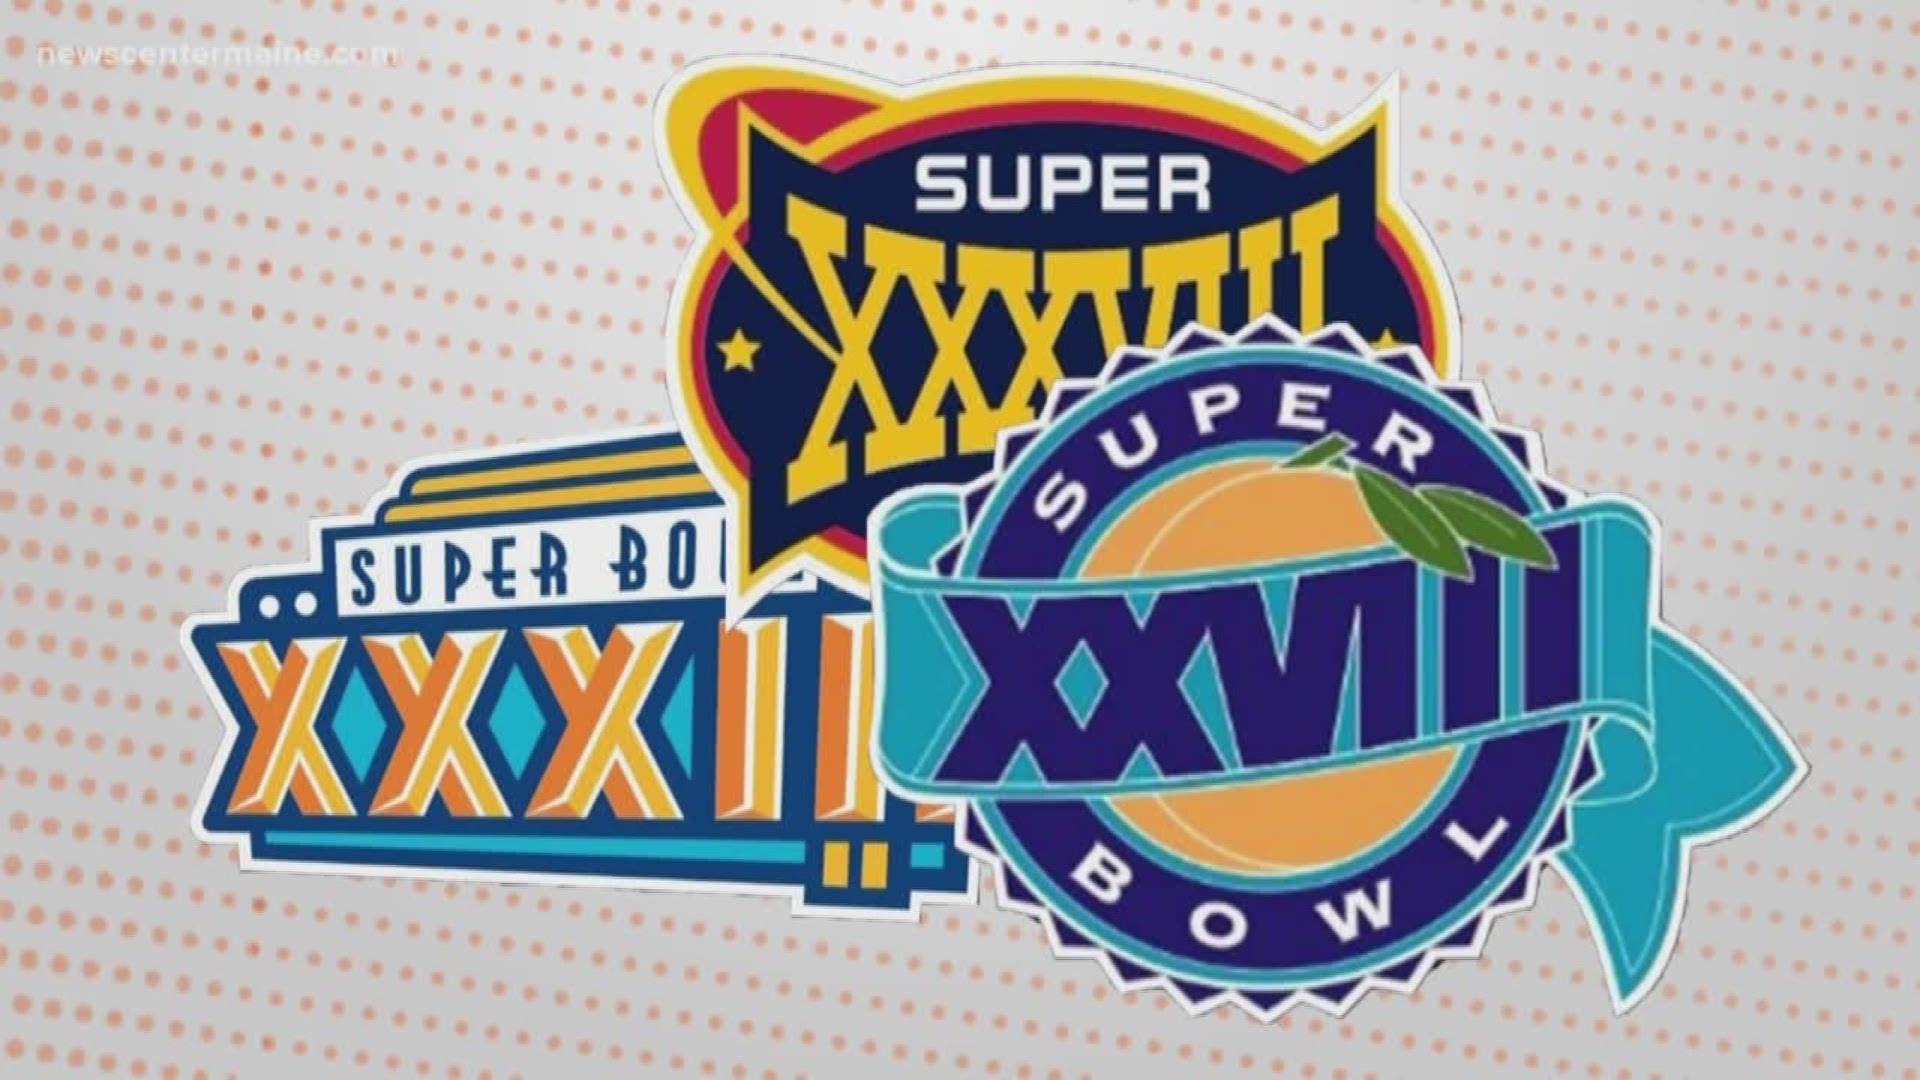 An unordinary game requires unordinary numbers. Our Why Guy dives into the history of roman numerals at the Super Bowl.